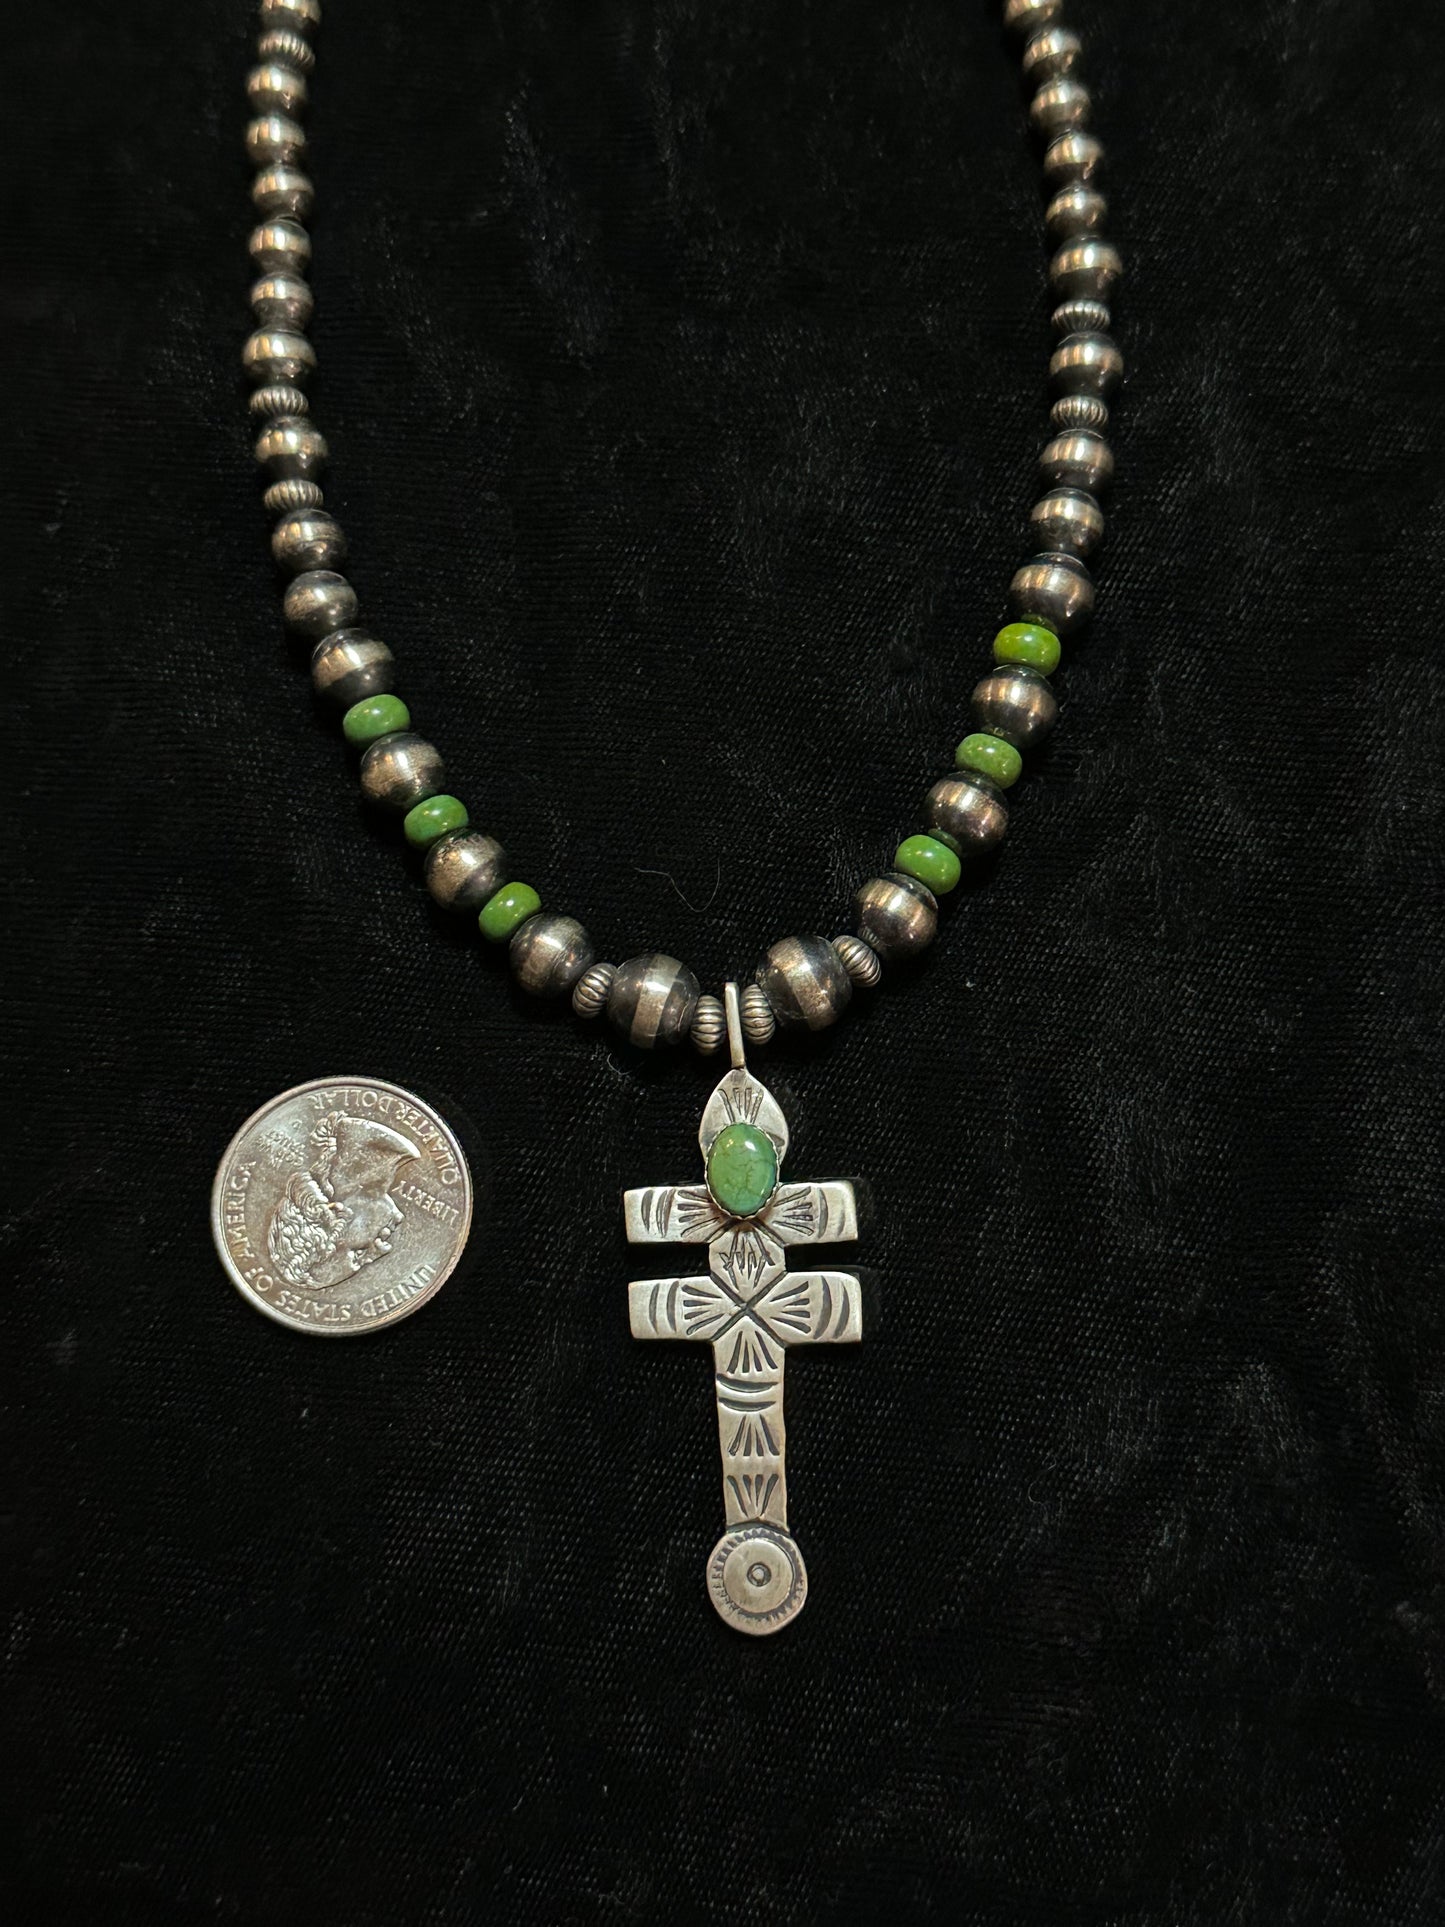 Graduated Navajo Pearls and Green Turquoise with Pendant